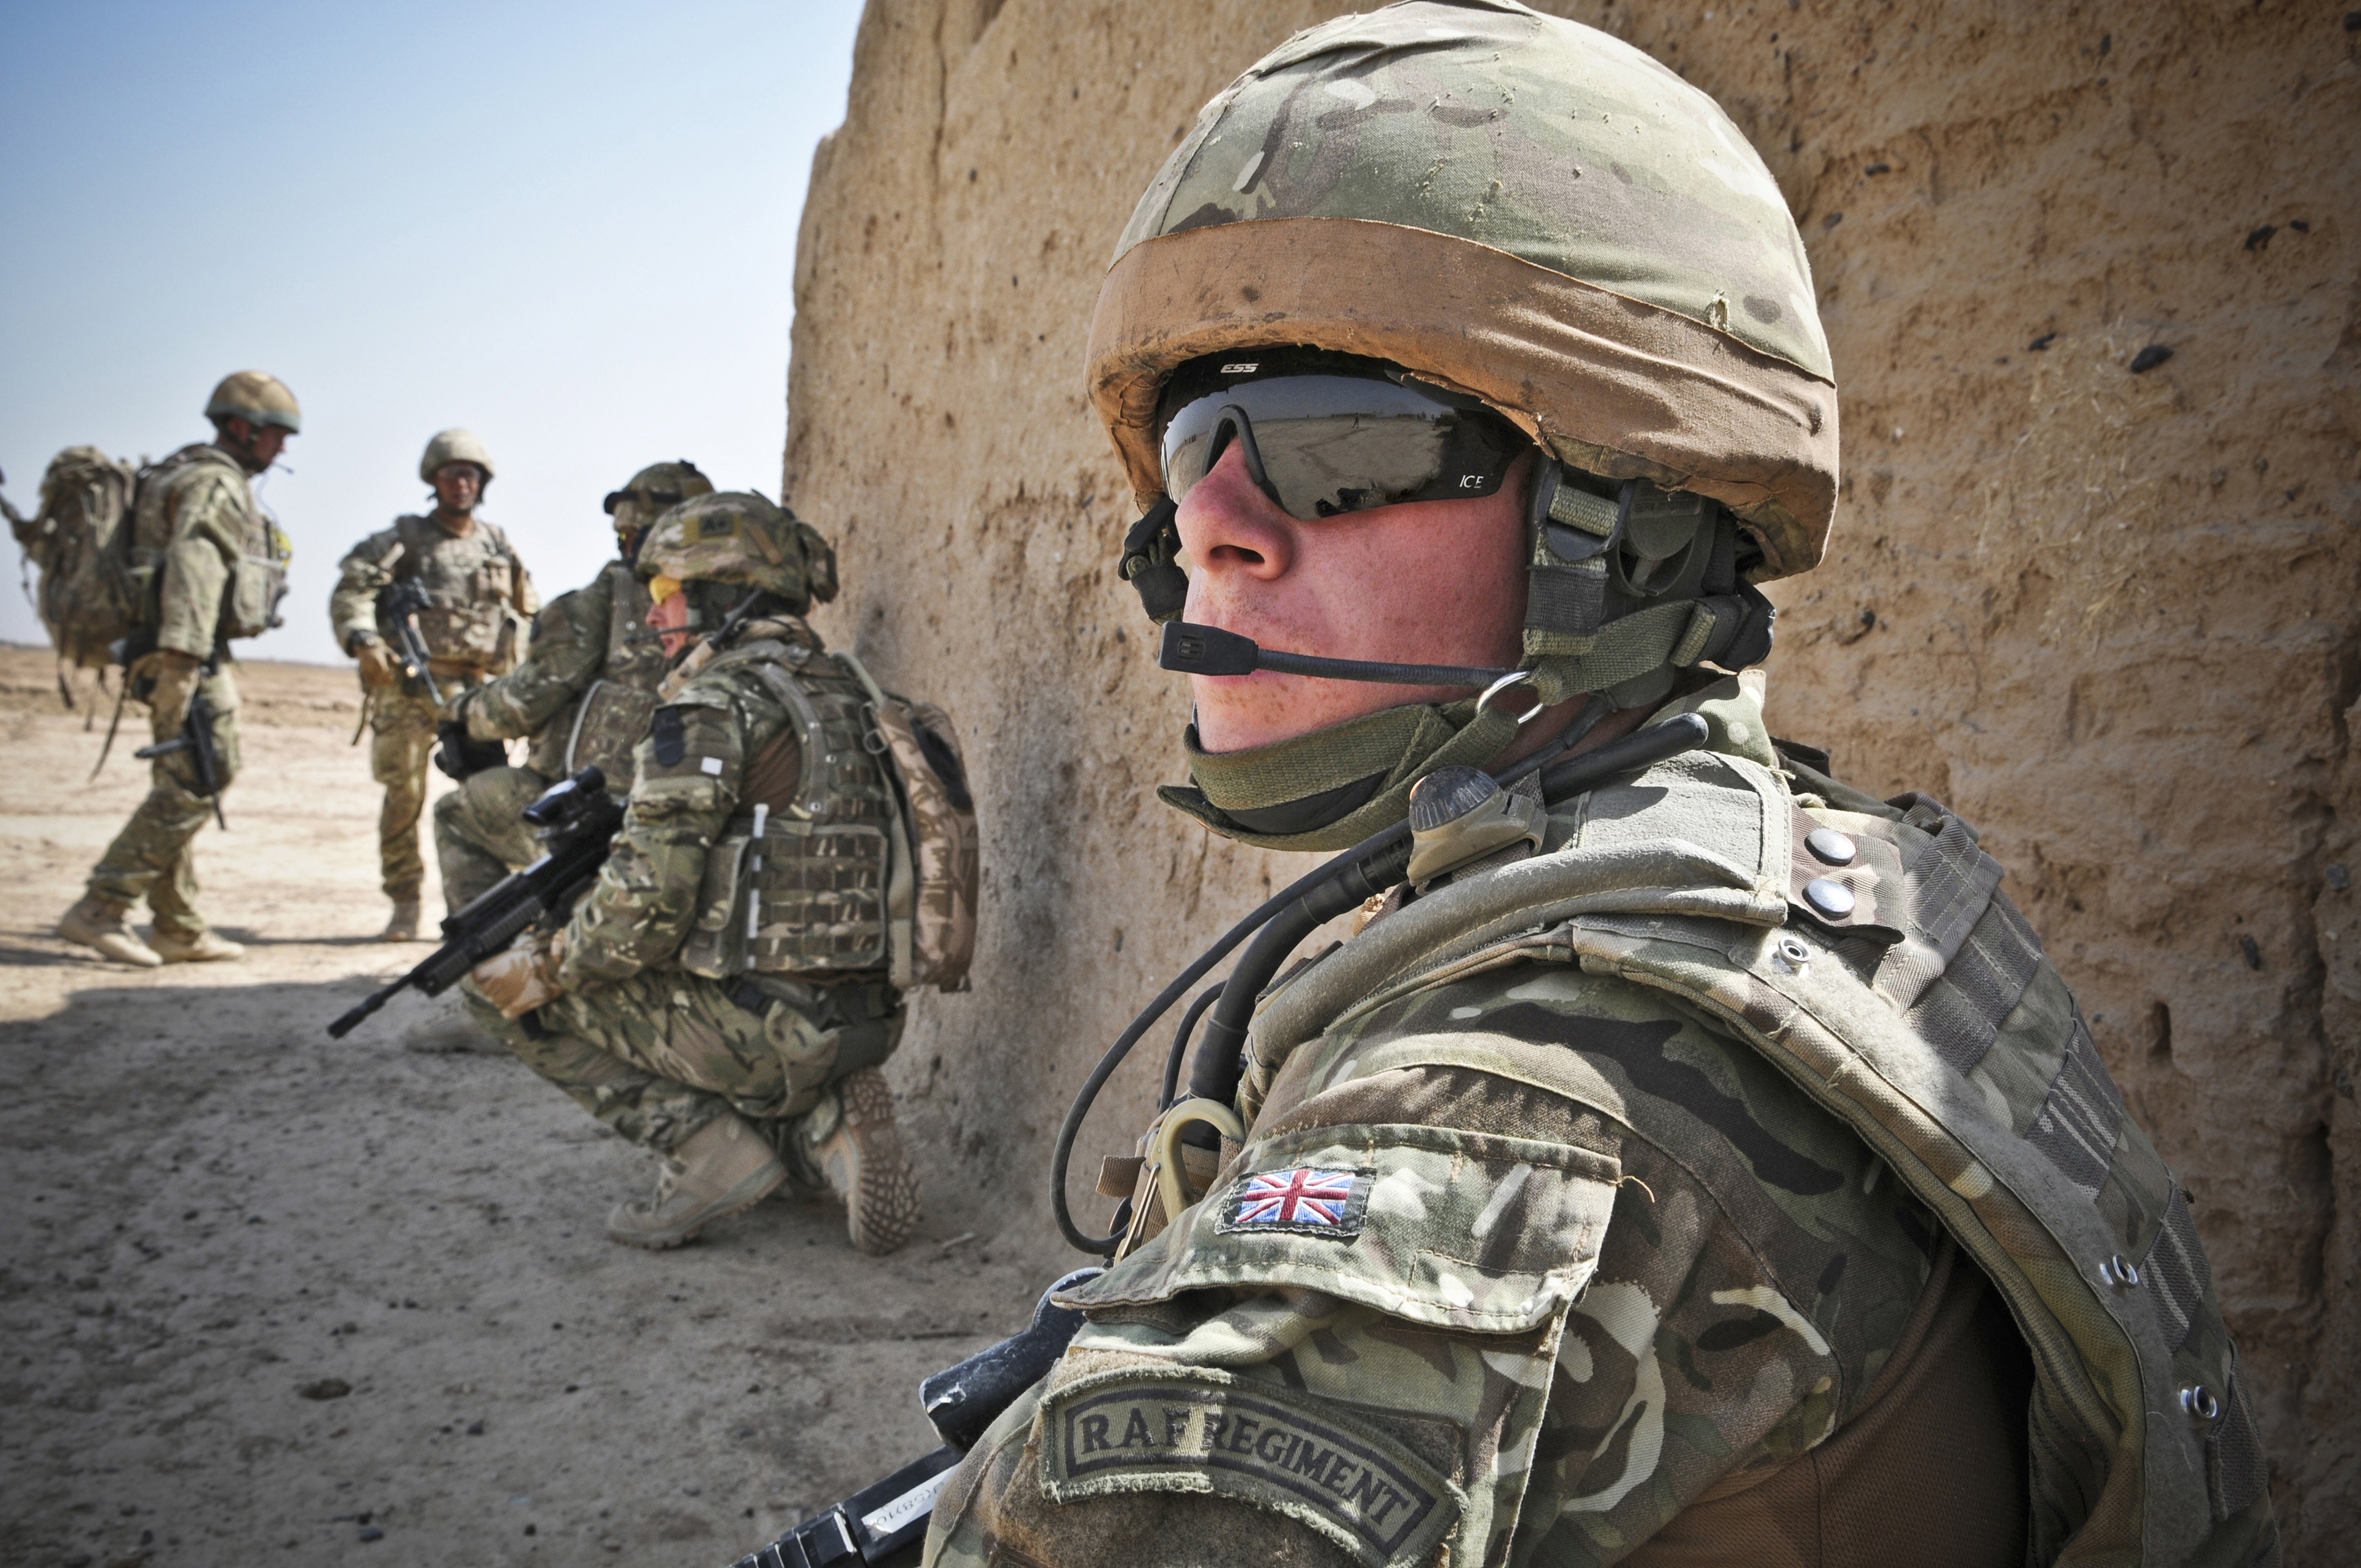 RAF Regiment in the Middle East.